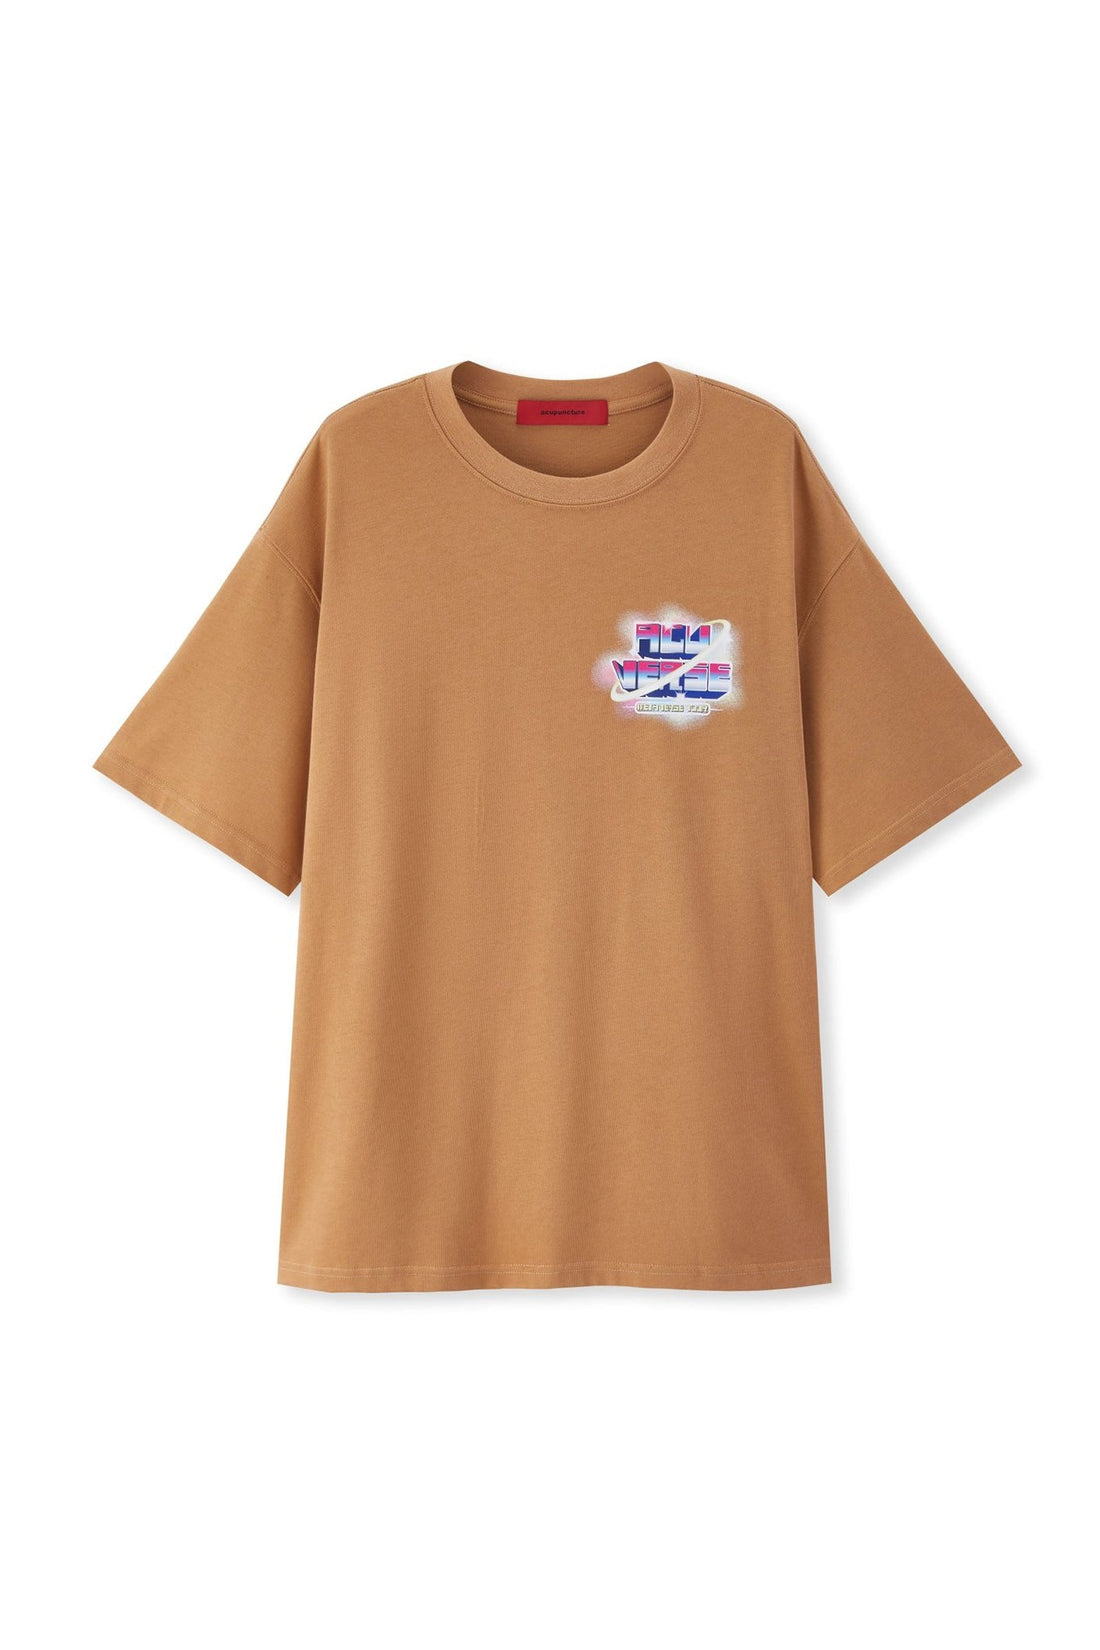 VERSE T-SHIRT BROWN Acupuncture